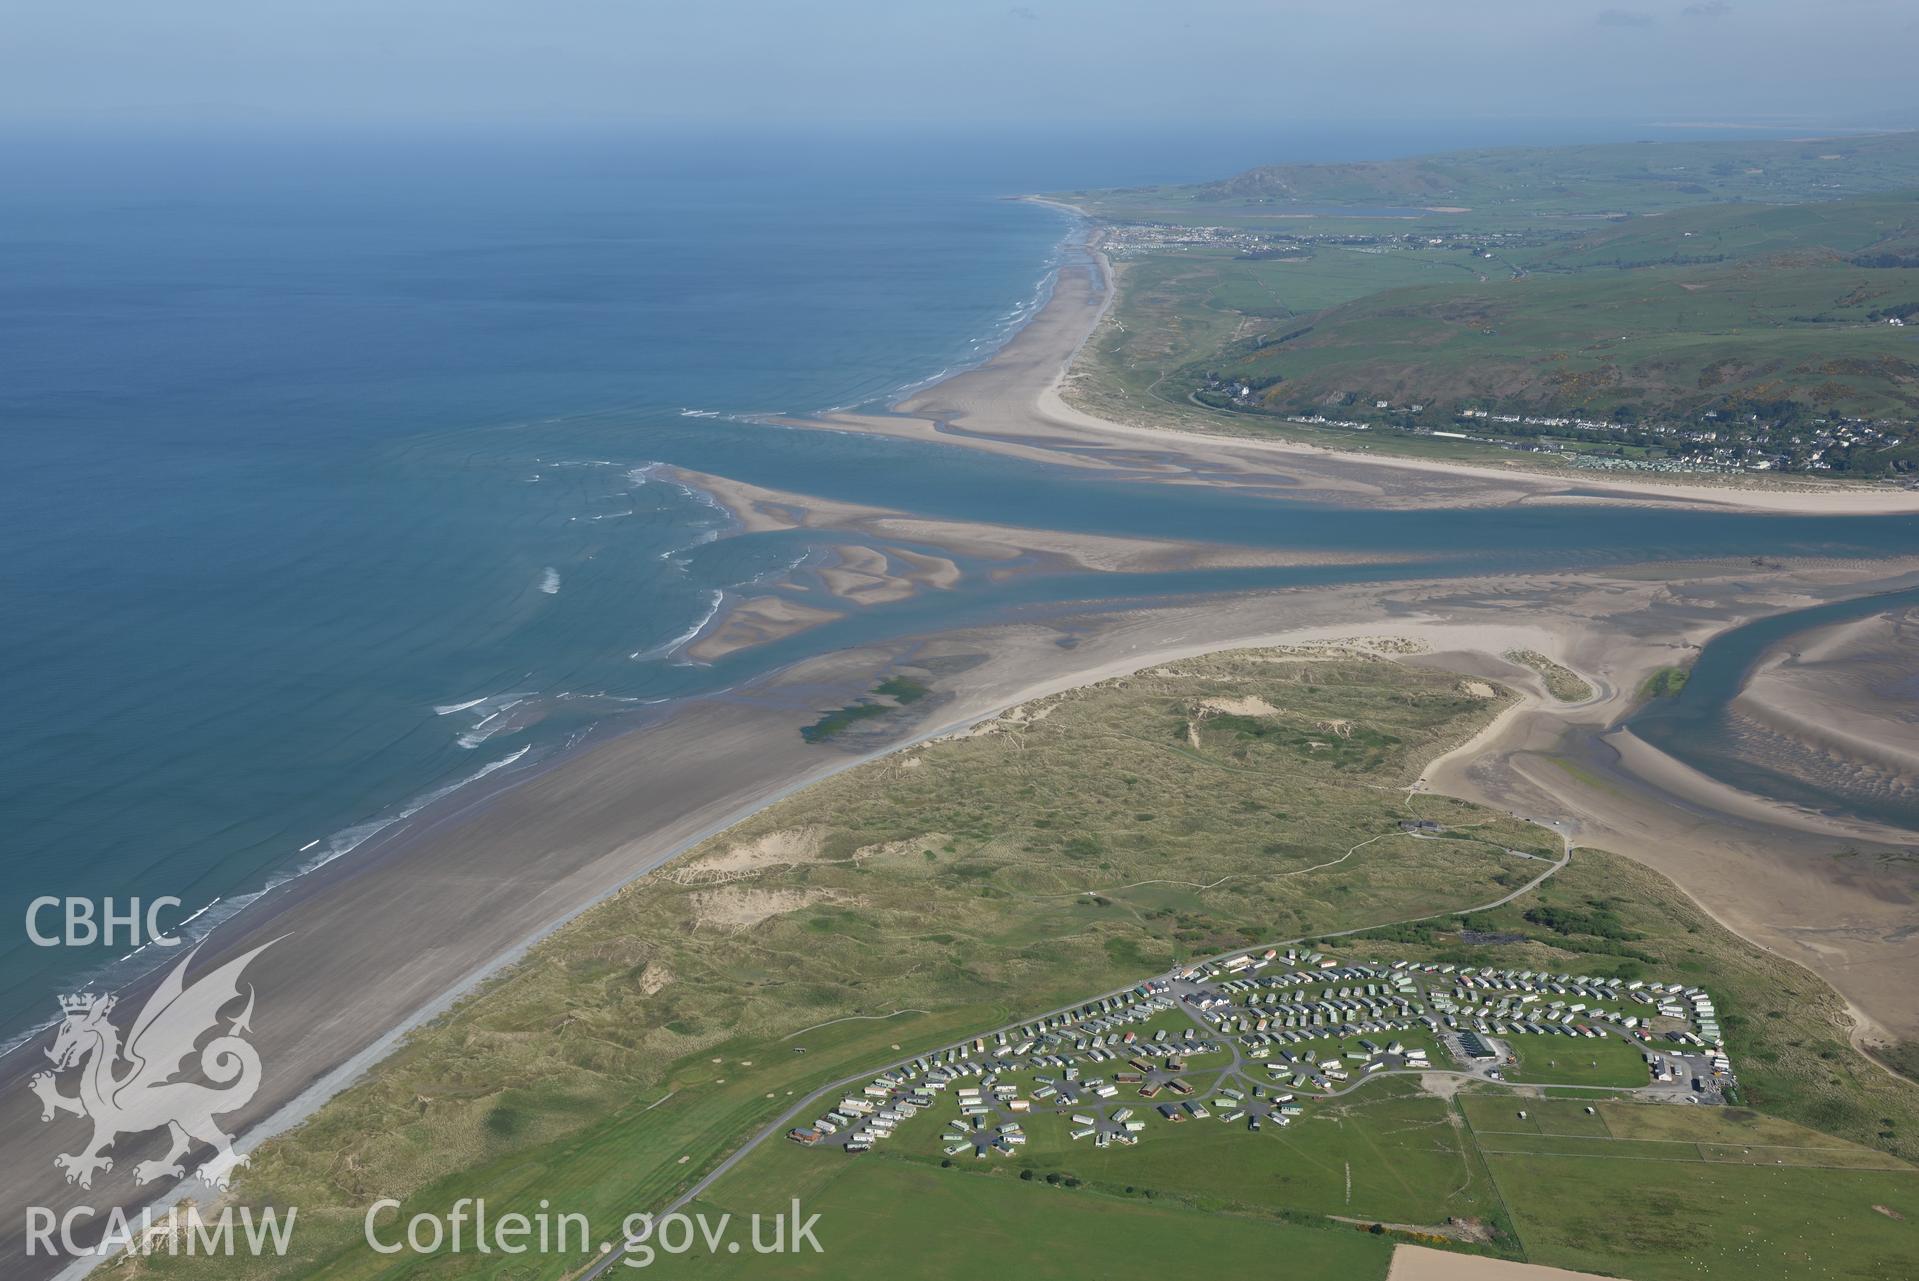 Aerial photography of Ynyslas taken on 3rd May 2017.  Baseline aerial reconnaissance survey for the CHERISH Project. ? Crown: CHERISH PROJECT 2017. Produced with EU funds through the Ireland Wales Co-operation Programme 2014-2020. All material made freel